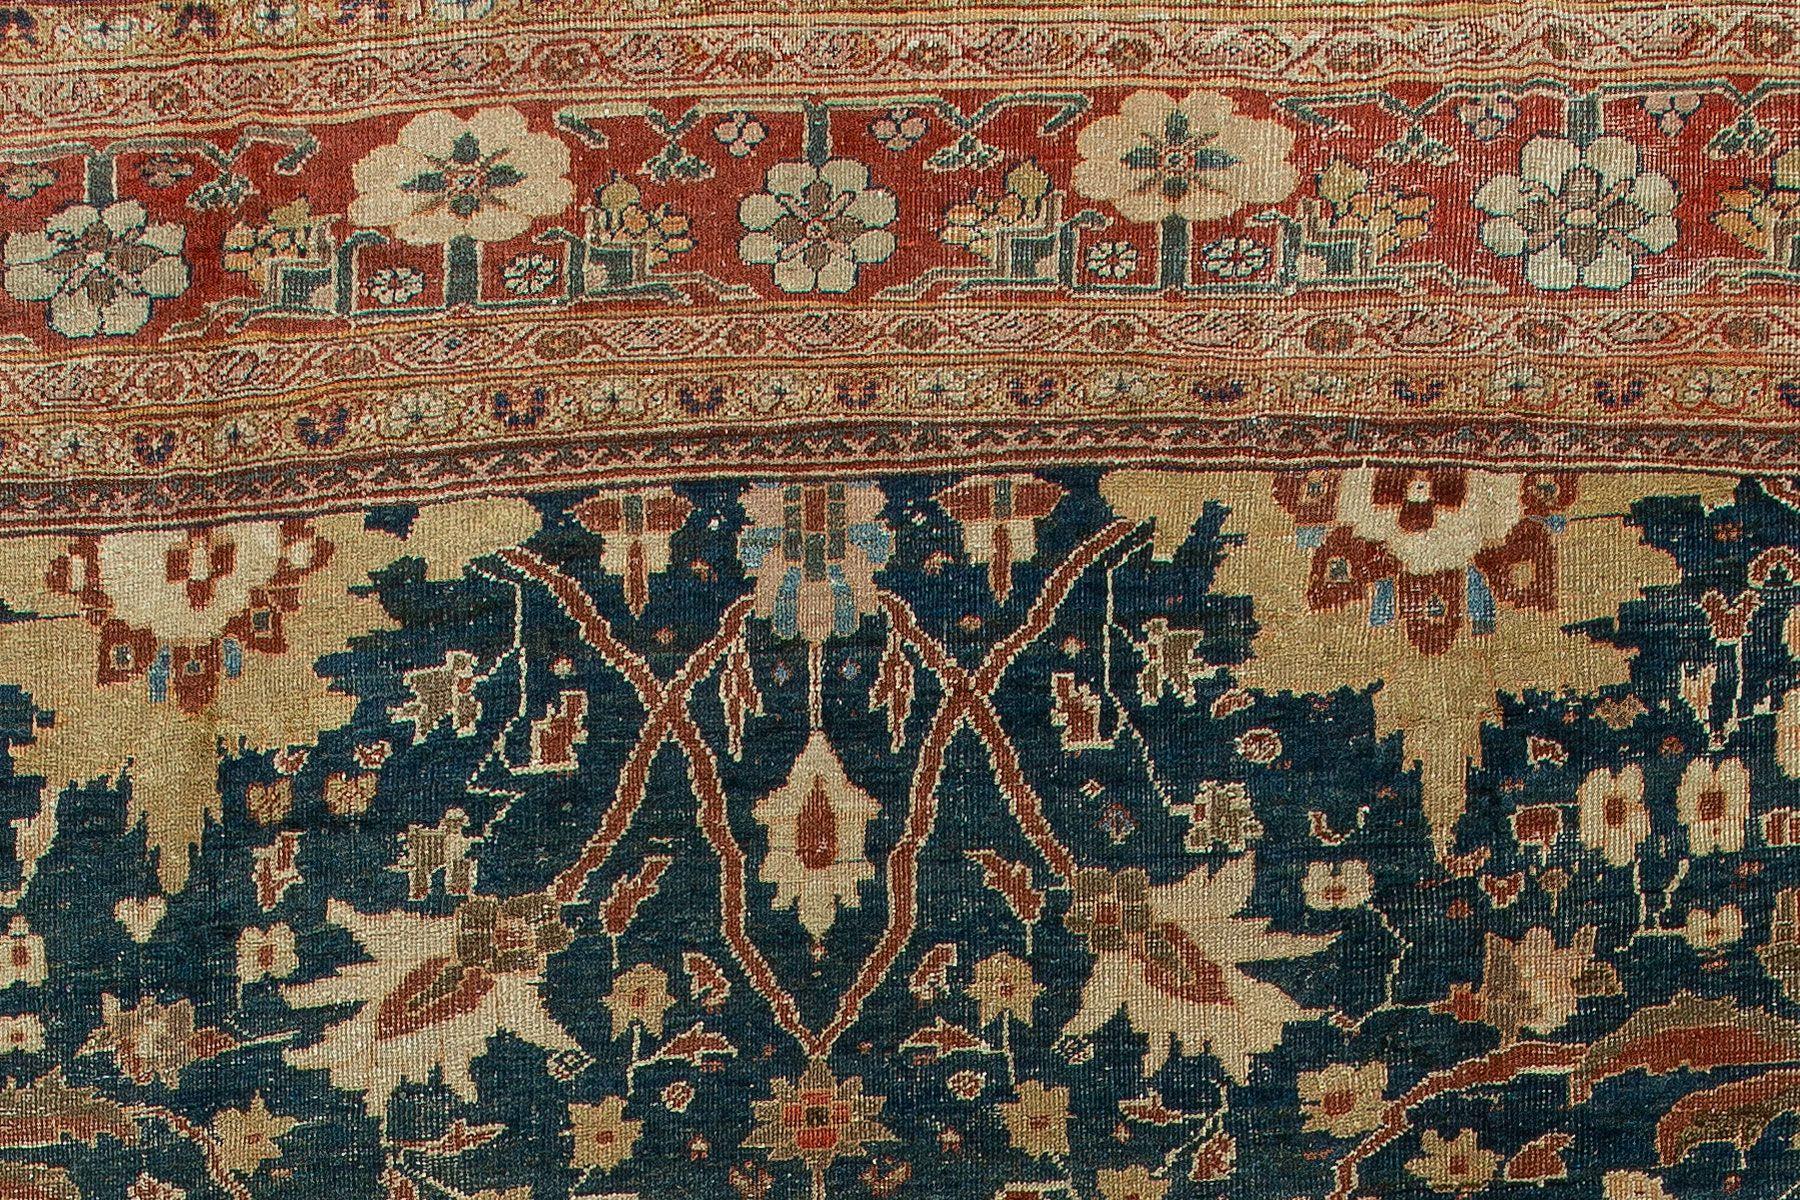 Phenomenal Large Scale Antique Sultanabad Mahal Persian Carpet 10